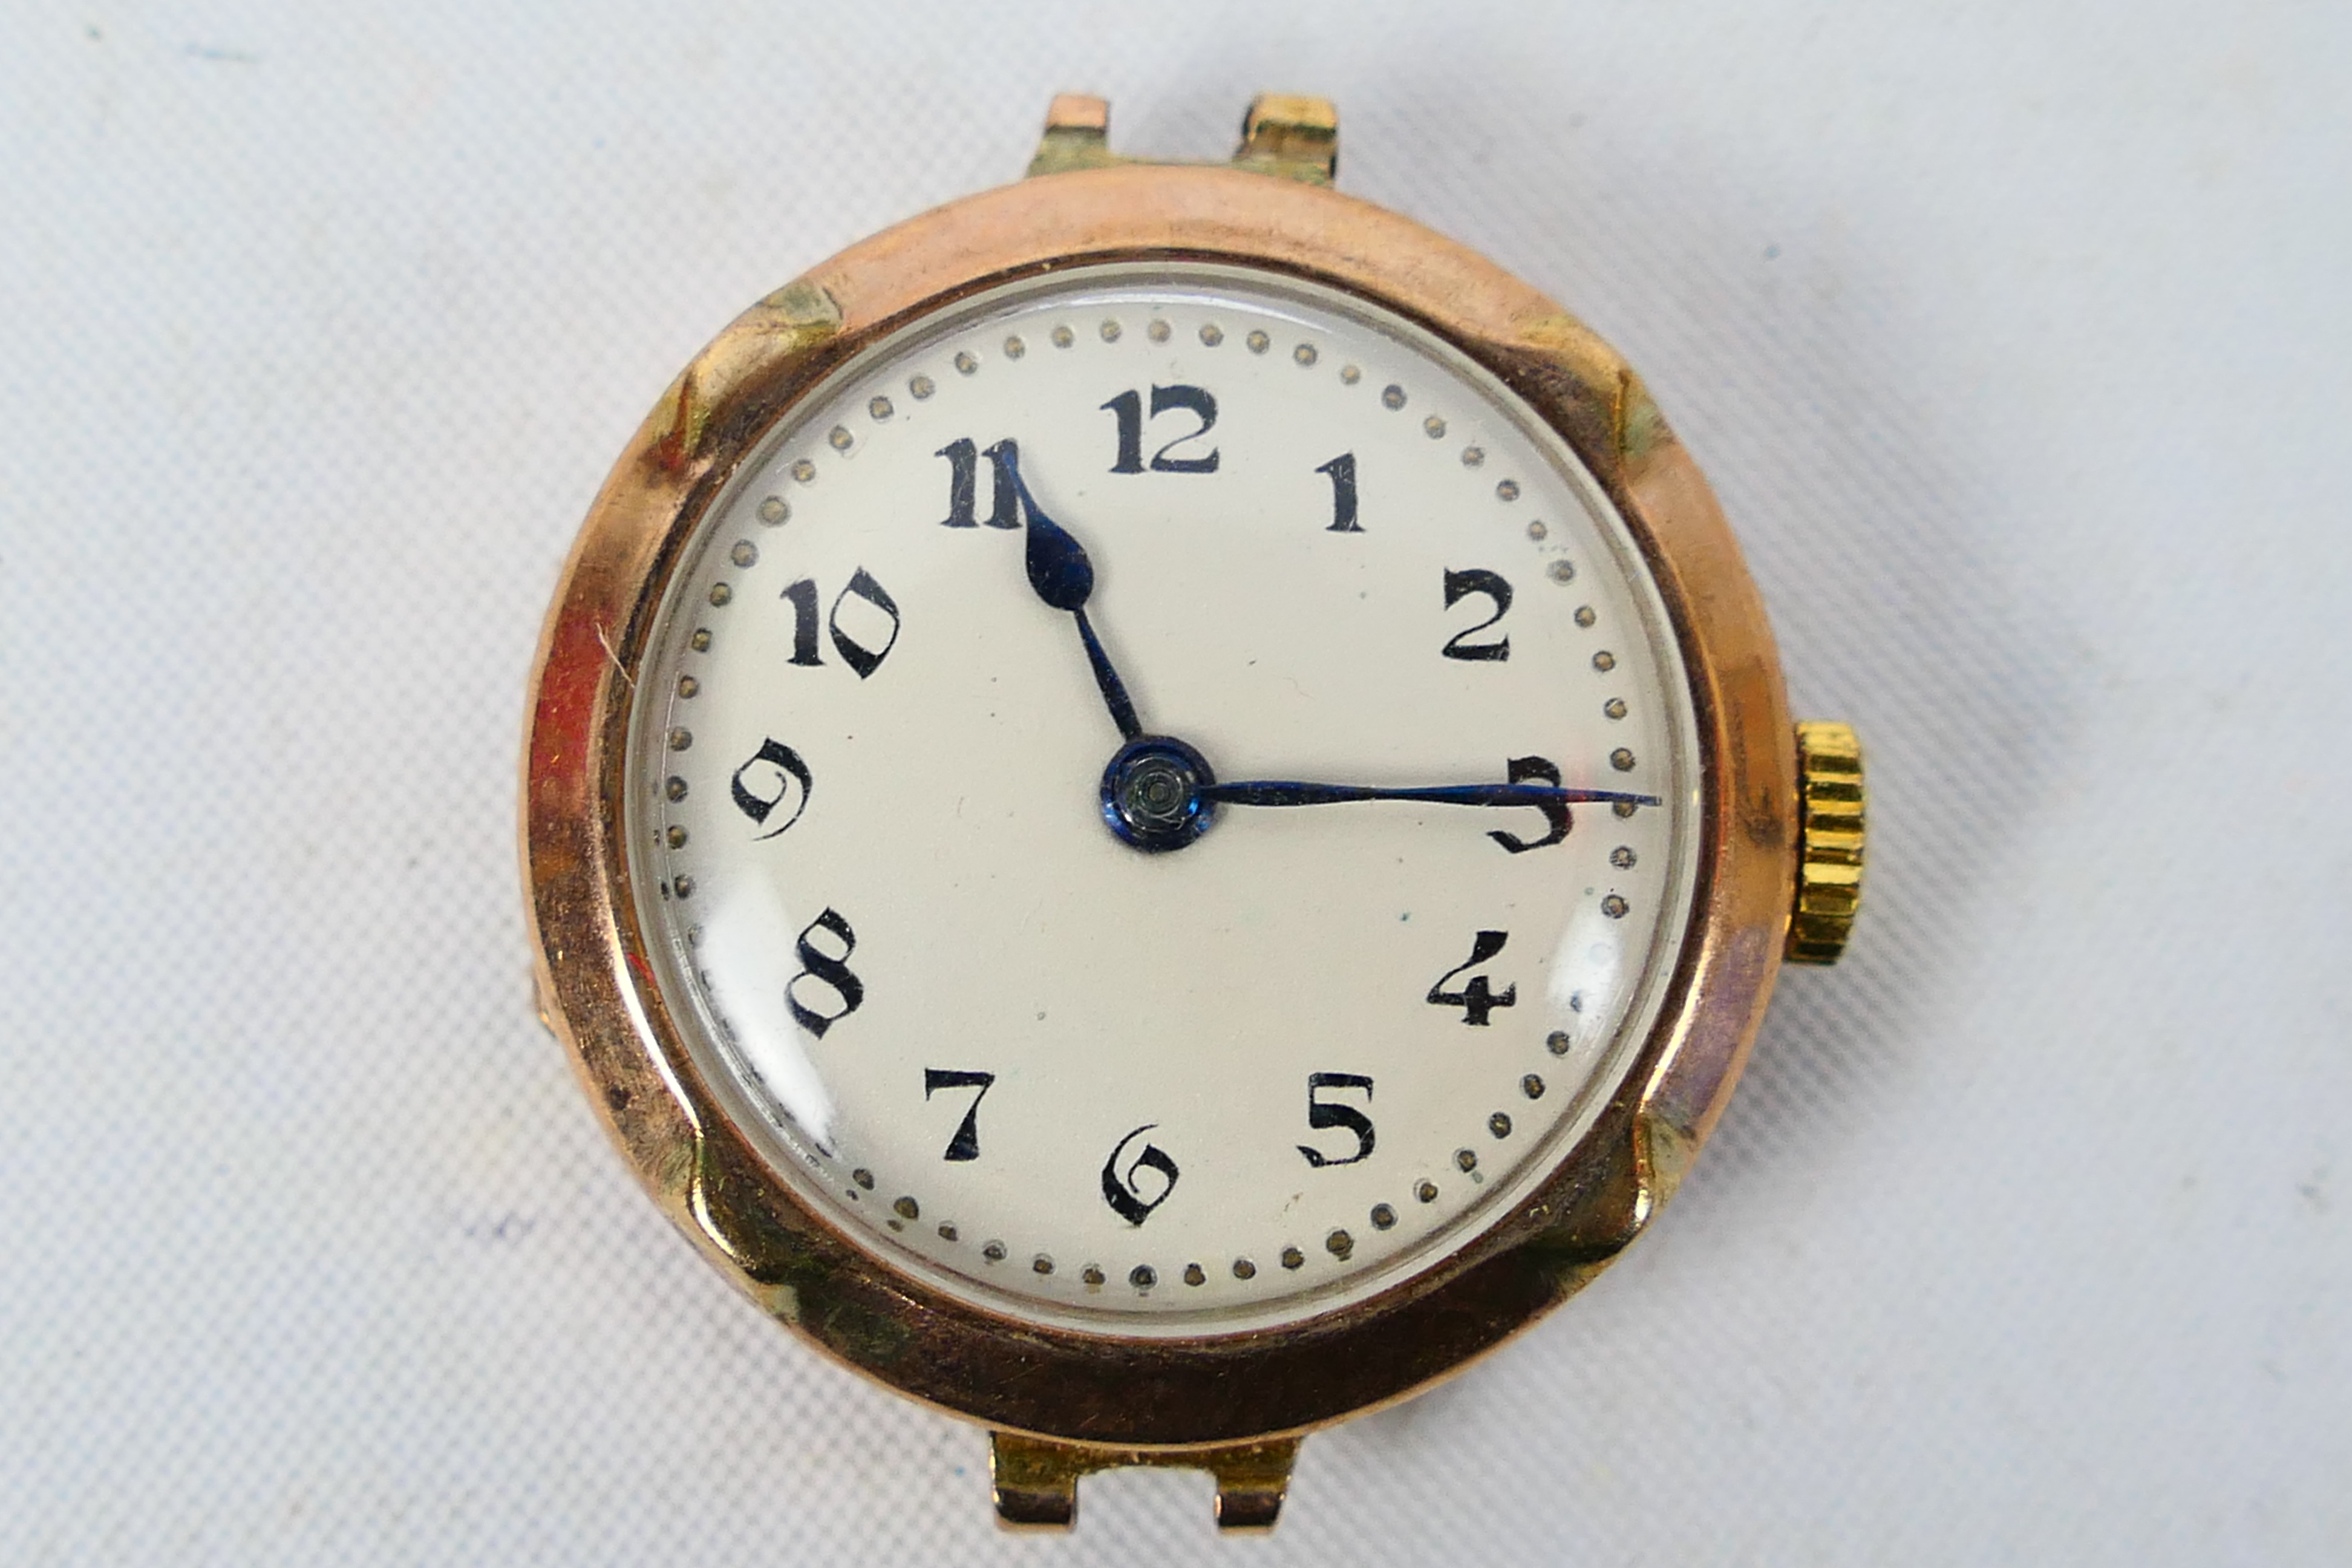 A 9ct rose gold cased wrist watch, approximately 13.7 grams.